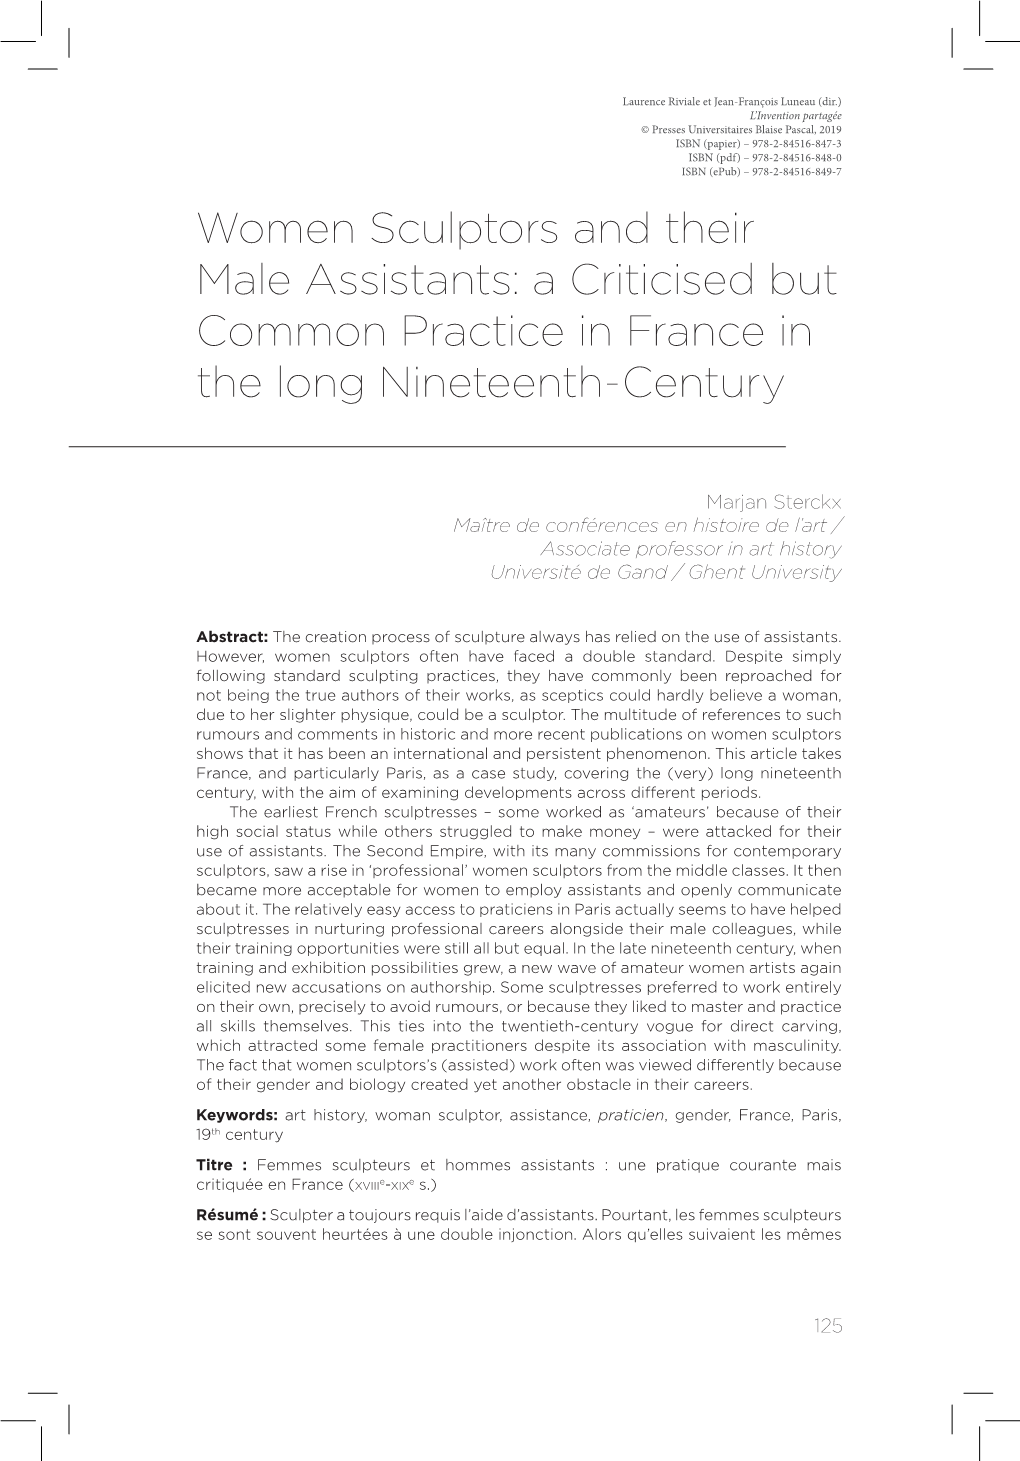 Women Sculptors and Their Male Assistants: a Criticised but Common Practice in France in the Long Nineteenth-Century